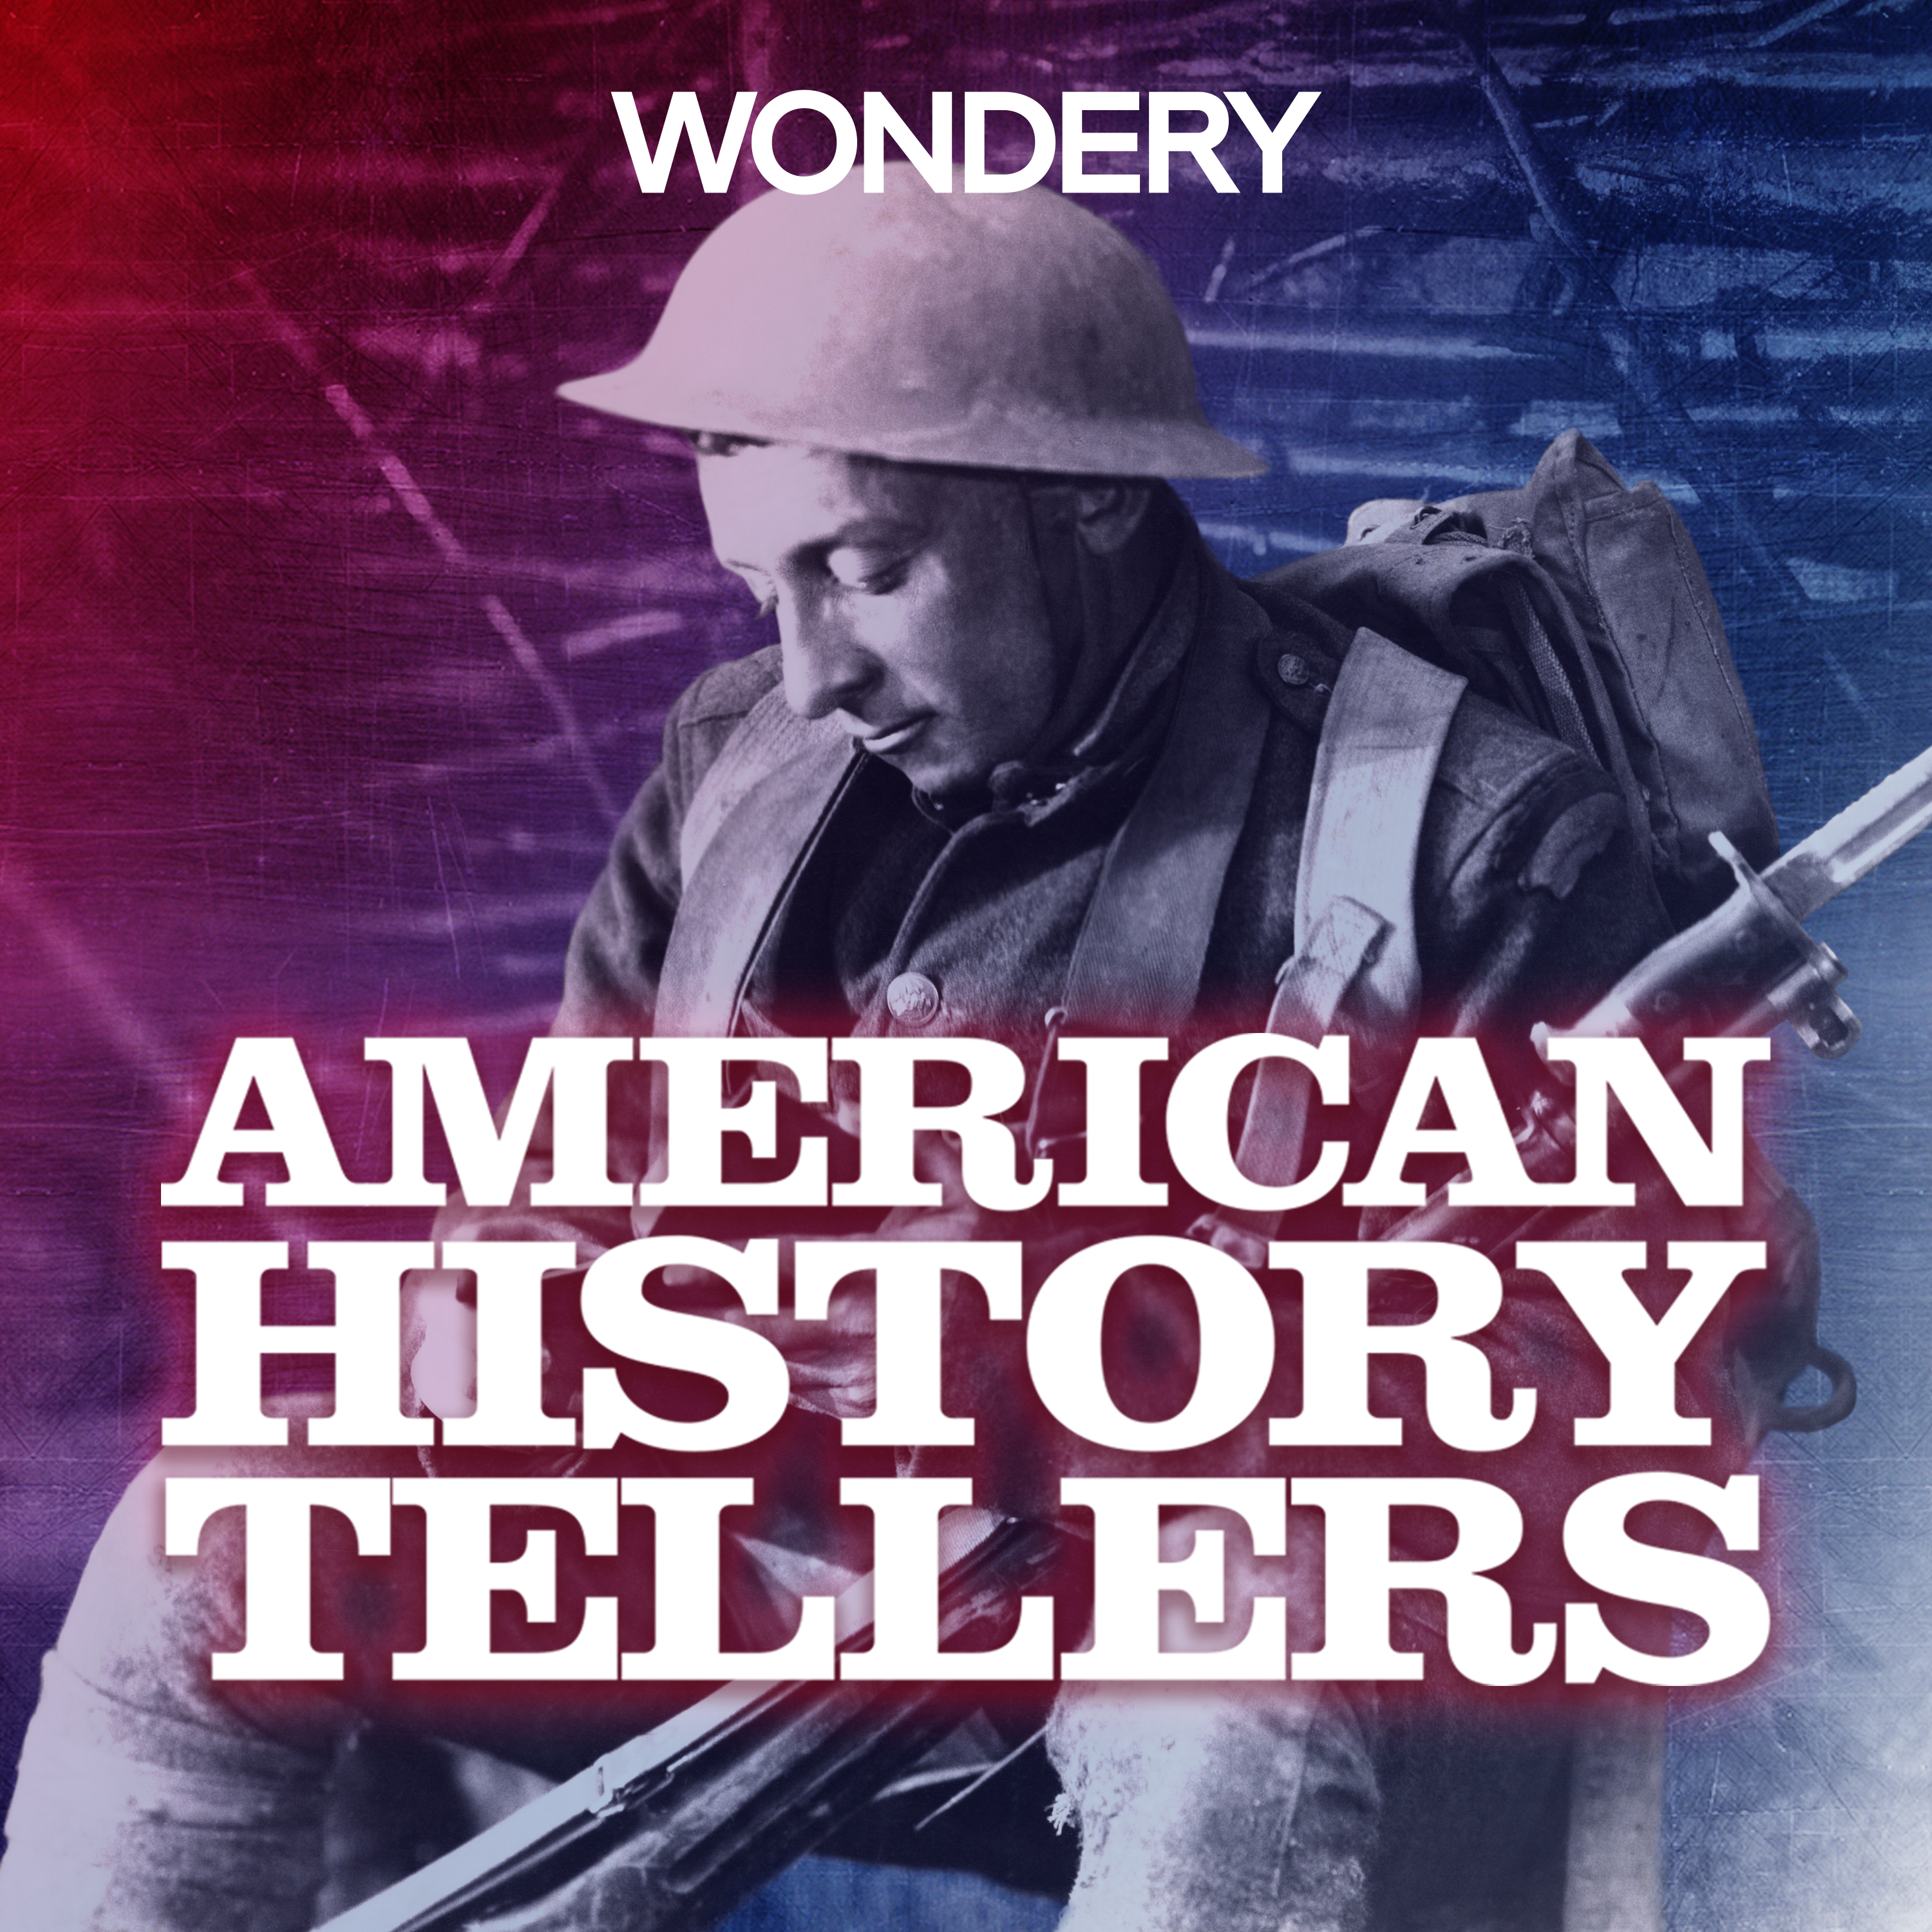 American History Tellers podcast